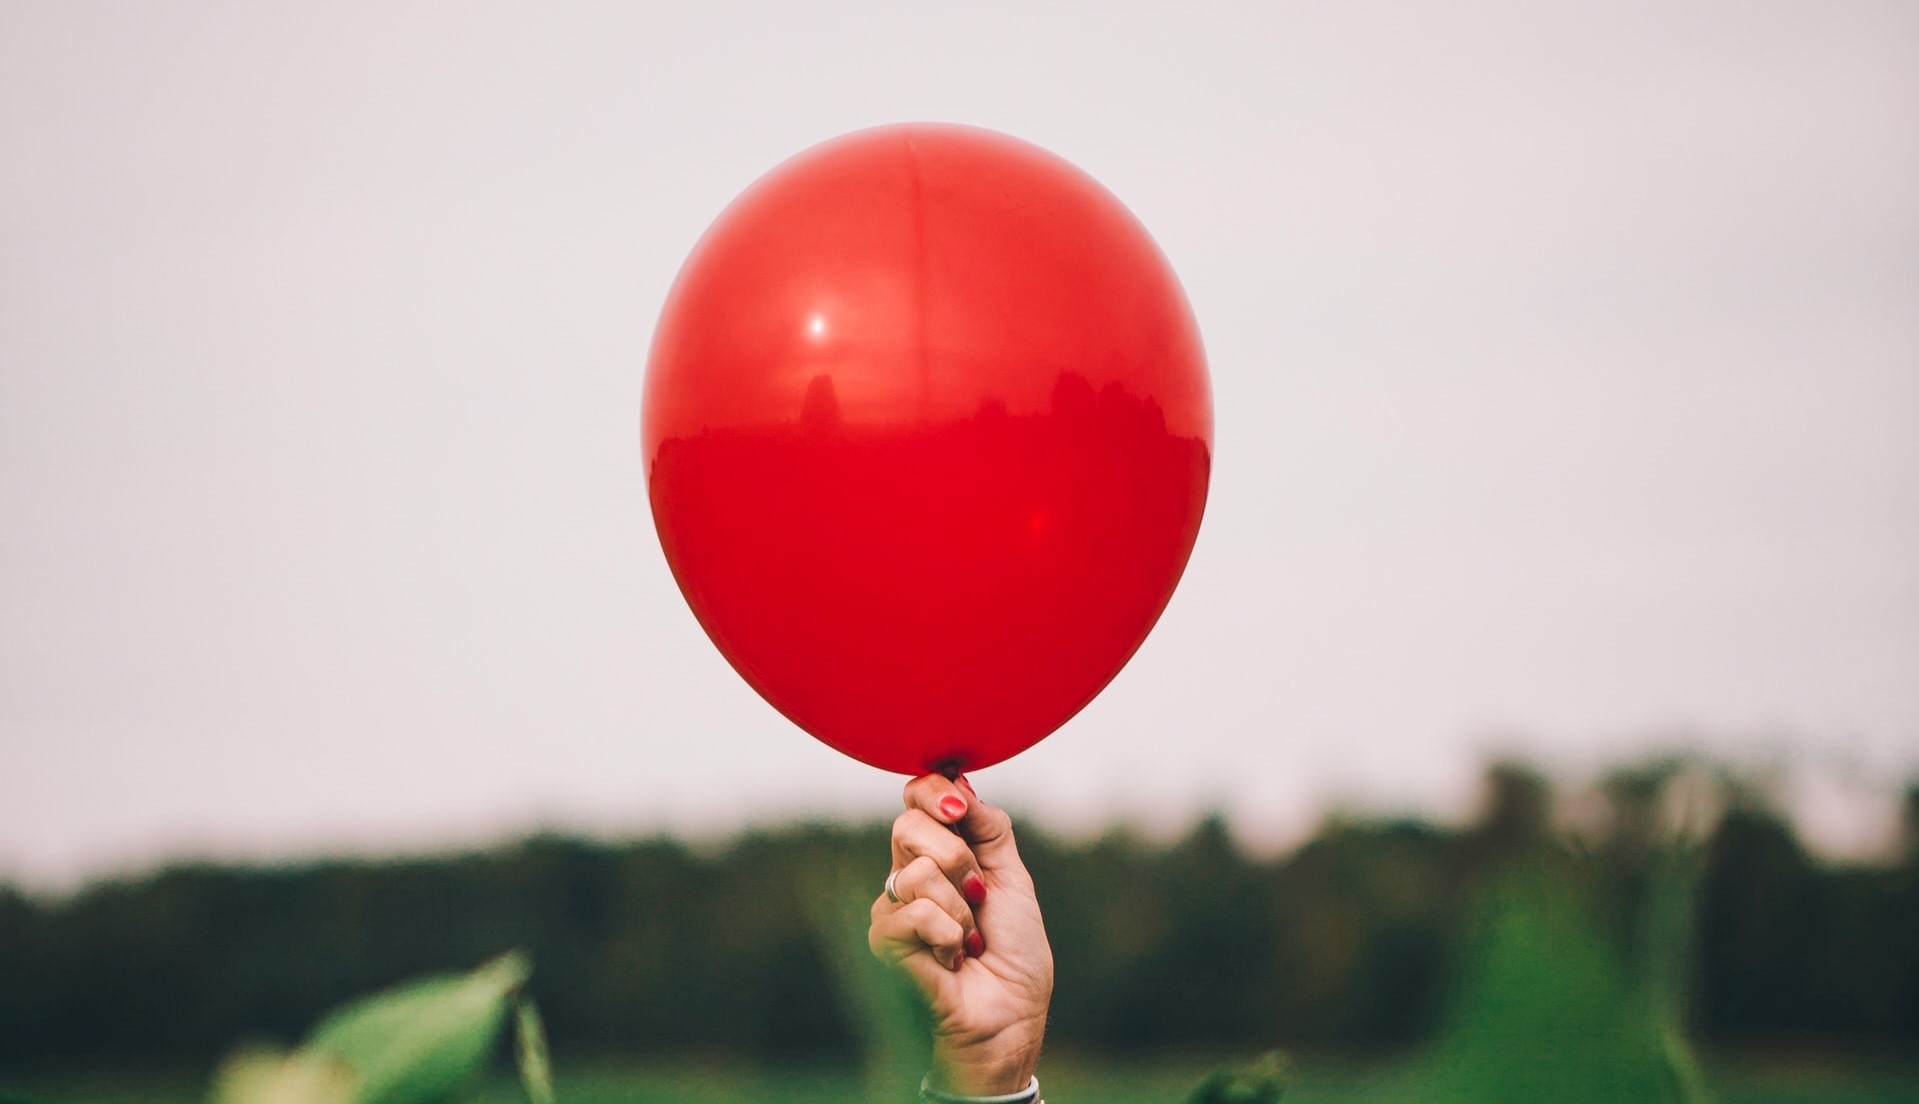 A red balloon held by a hand.